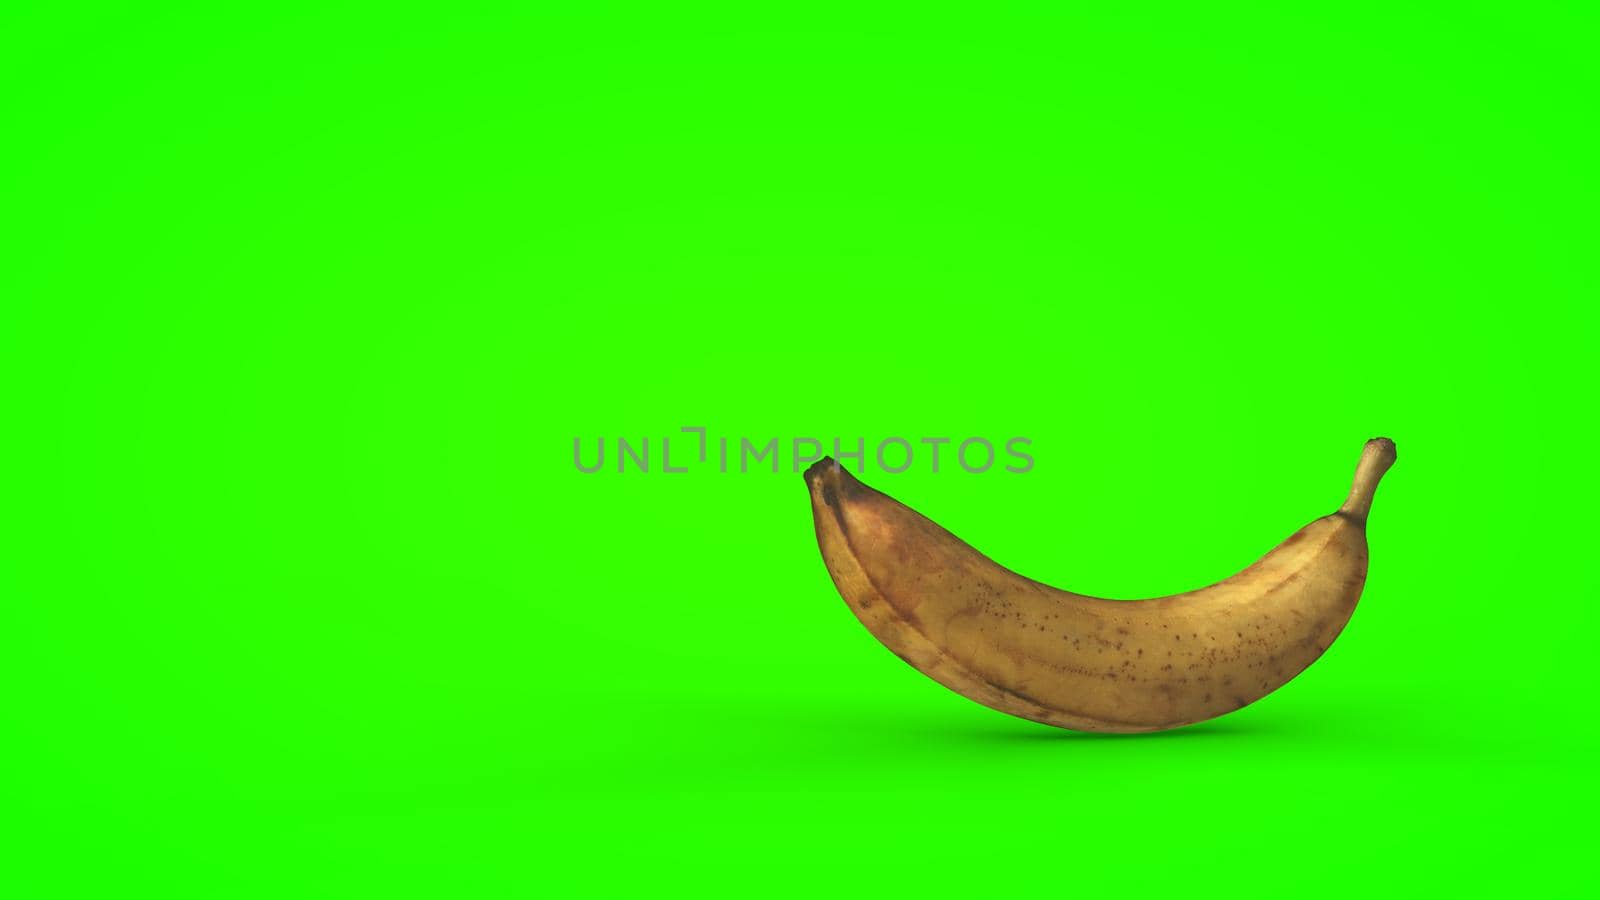 Ripe banana on a green background. 3D rendering.